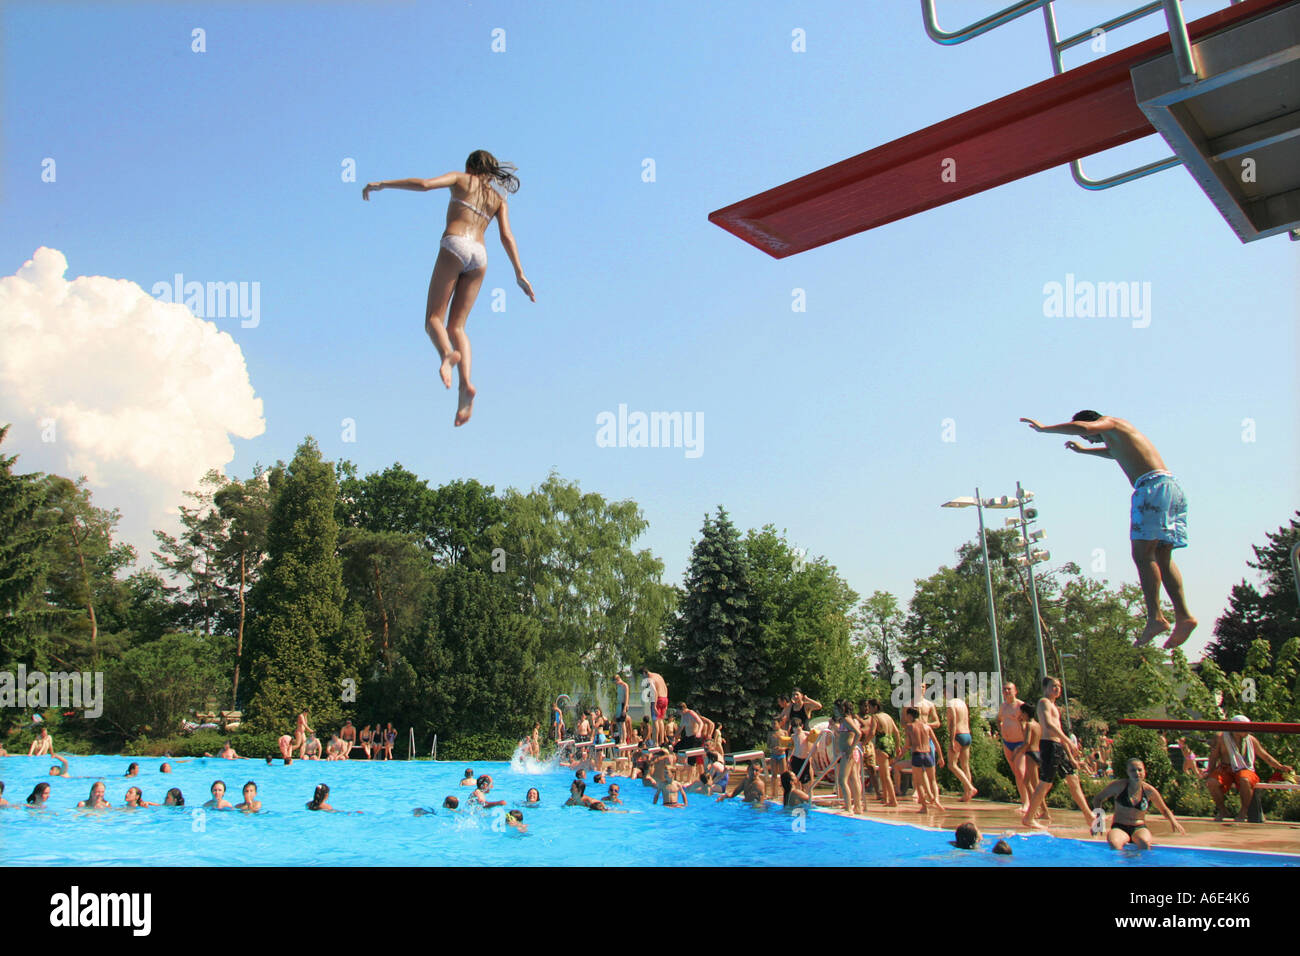 06.06.2005, Heidelberg, DEU, children jumps from the diving platform, hot summer at the swimming pool Stock Photo